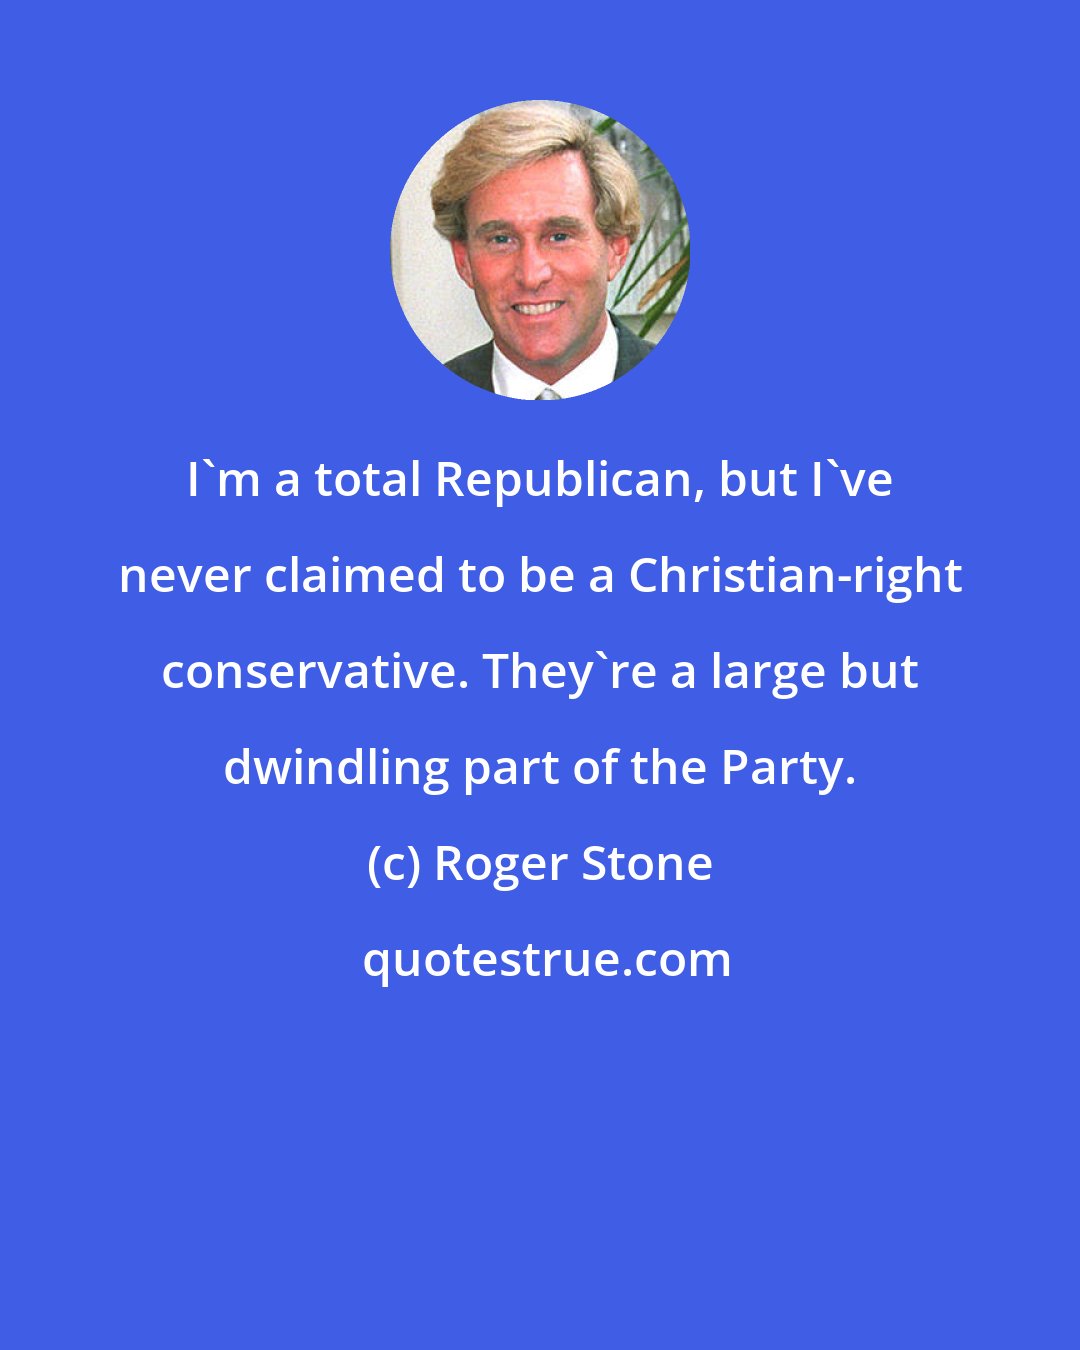 Roger Stone: I'm a total Republican, but I've never claimed to be a Christian-right conservative. They're a large but dwindling part of the Party.